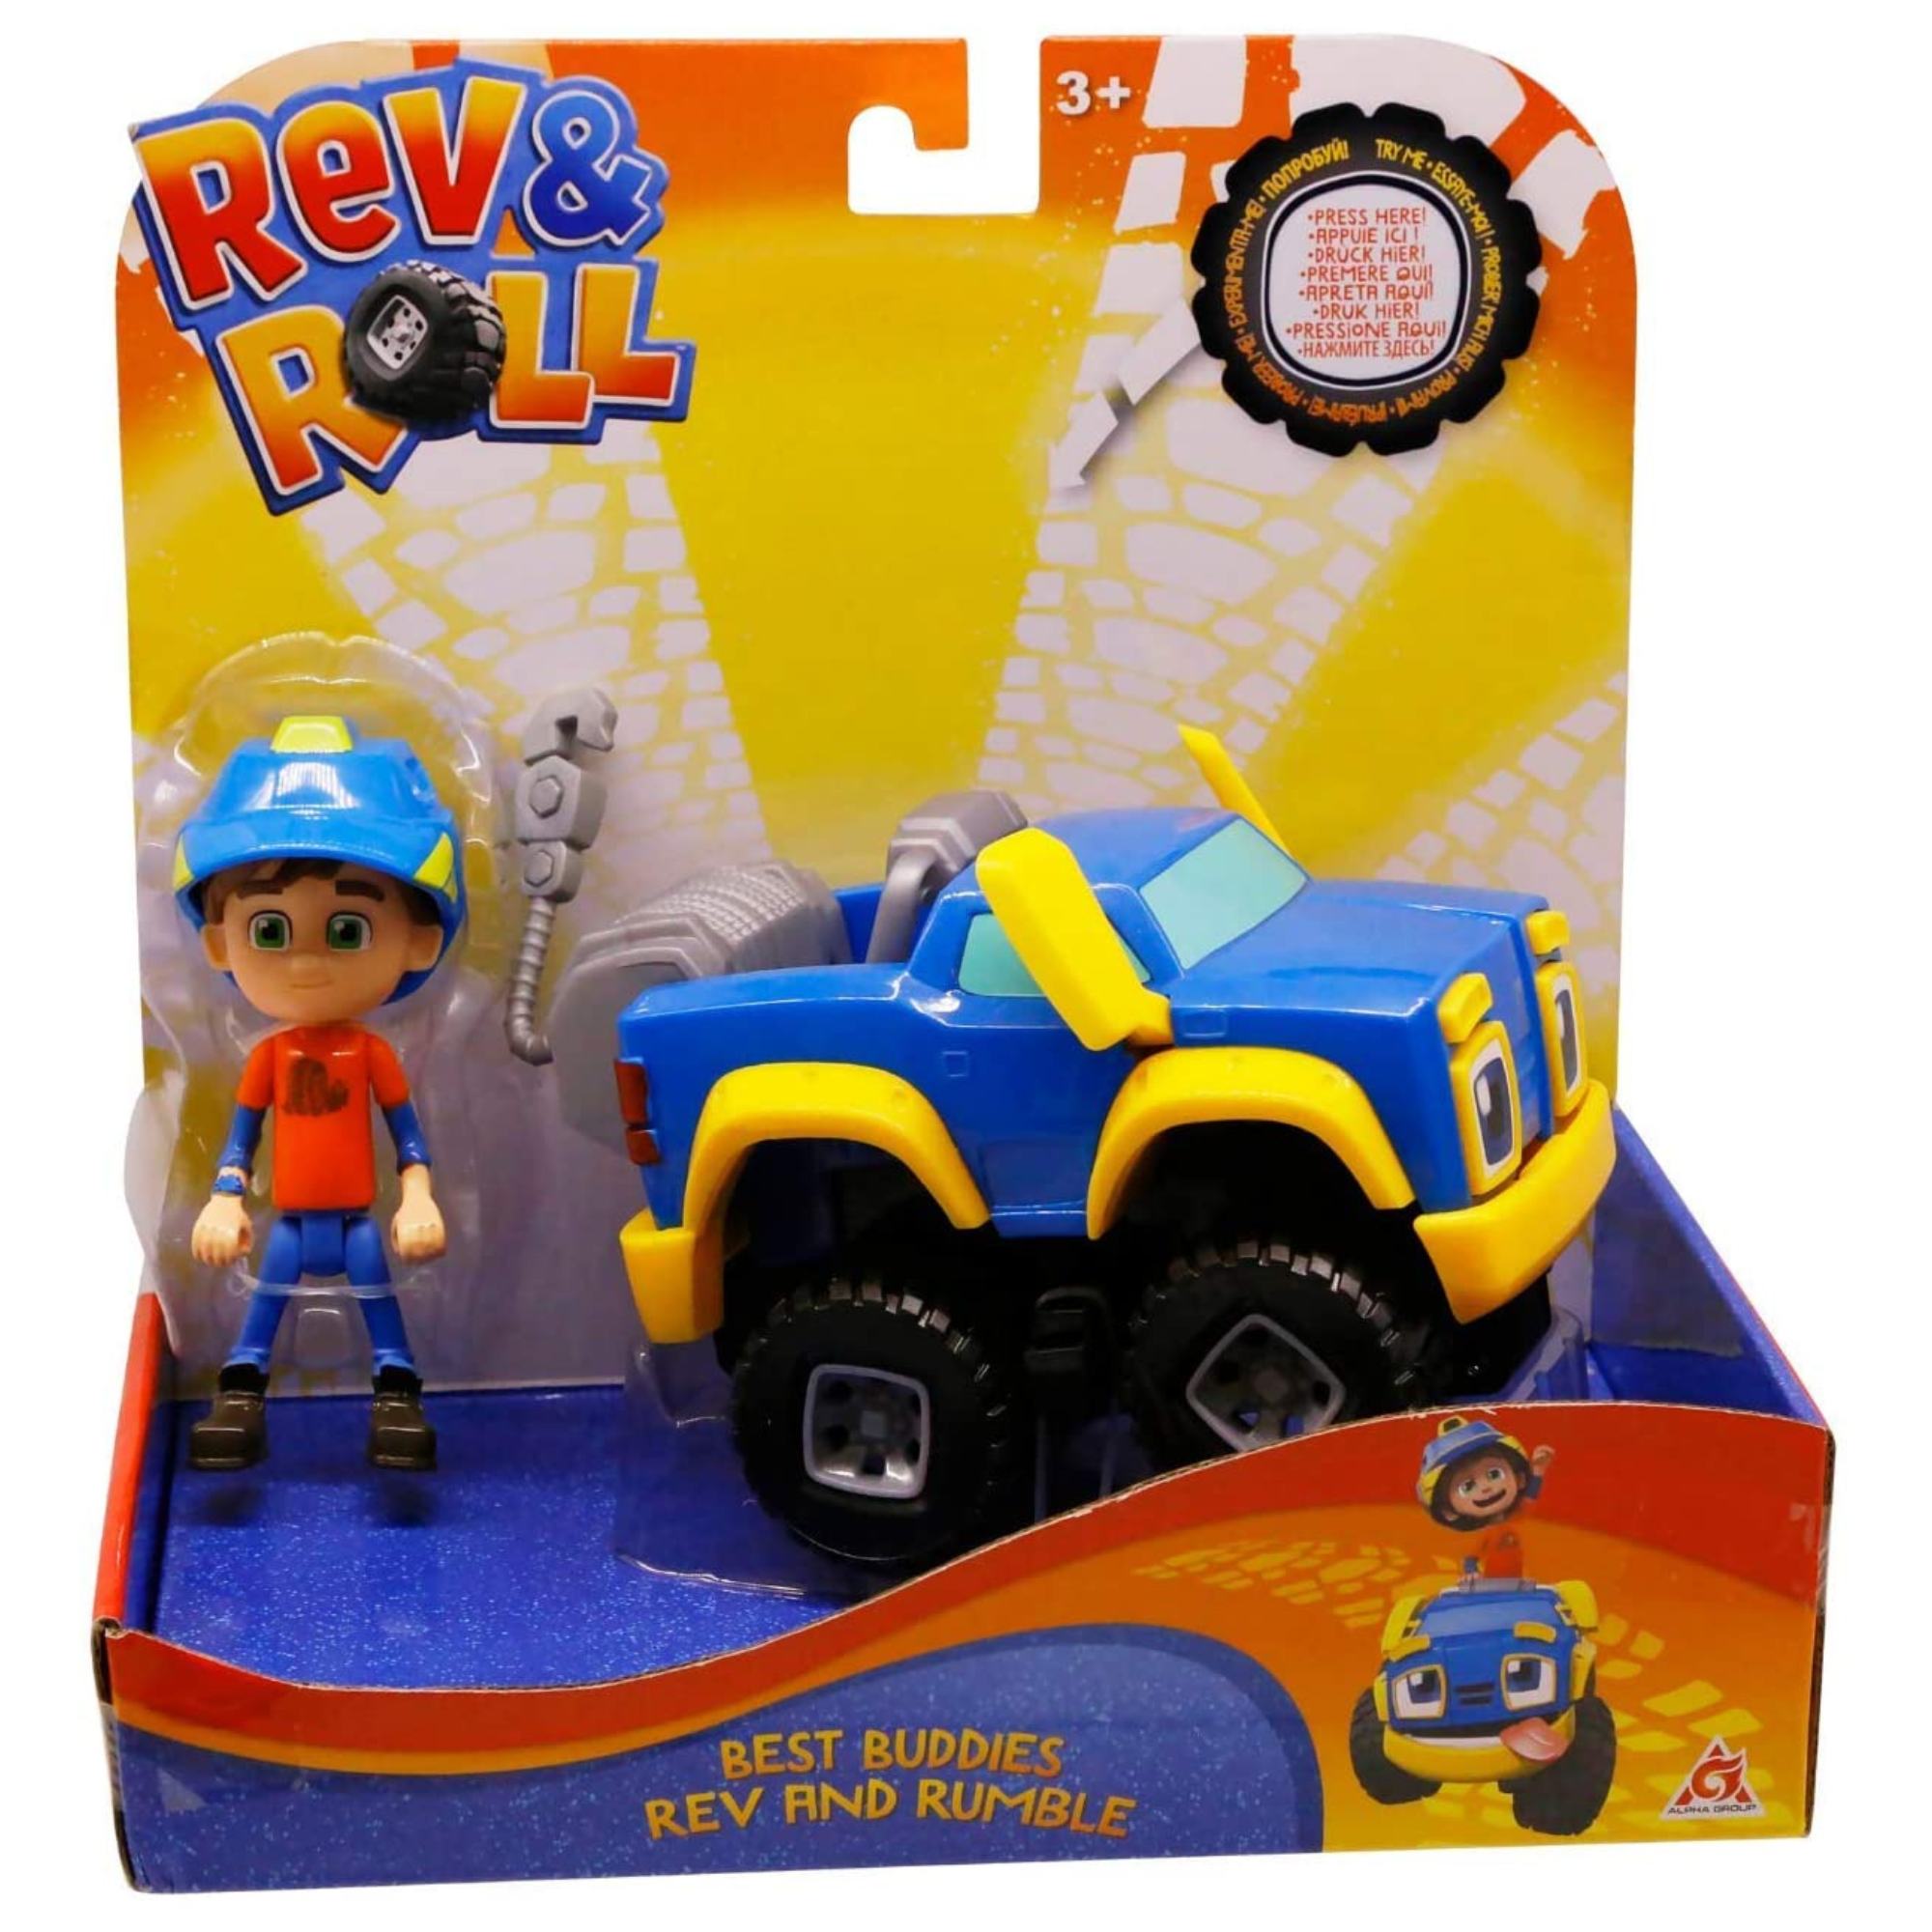 Rev & Roll BEST BUDDIES 17cm Rumble Vehicle with Mechanical Functions and 10cm Rev Figure Cartoon Toy - Kids Toy Age 3+ - Toptoys2u